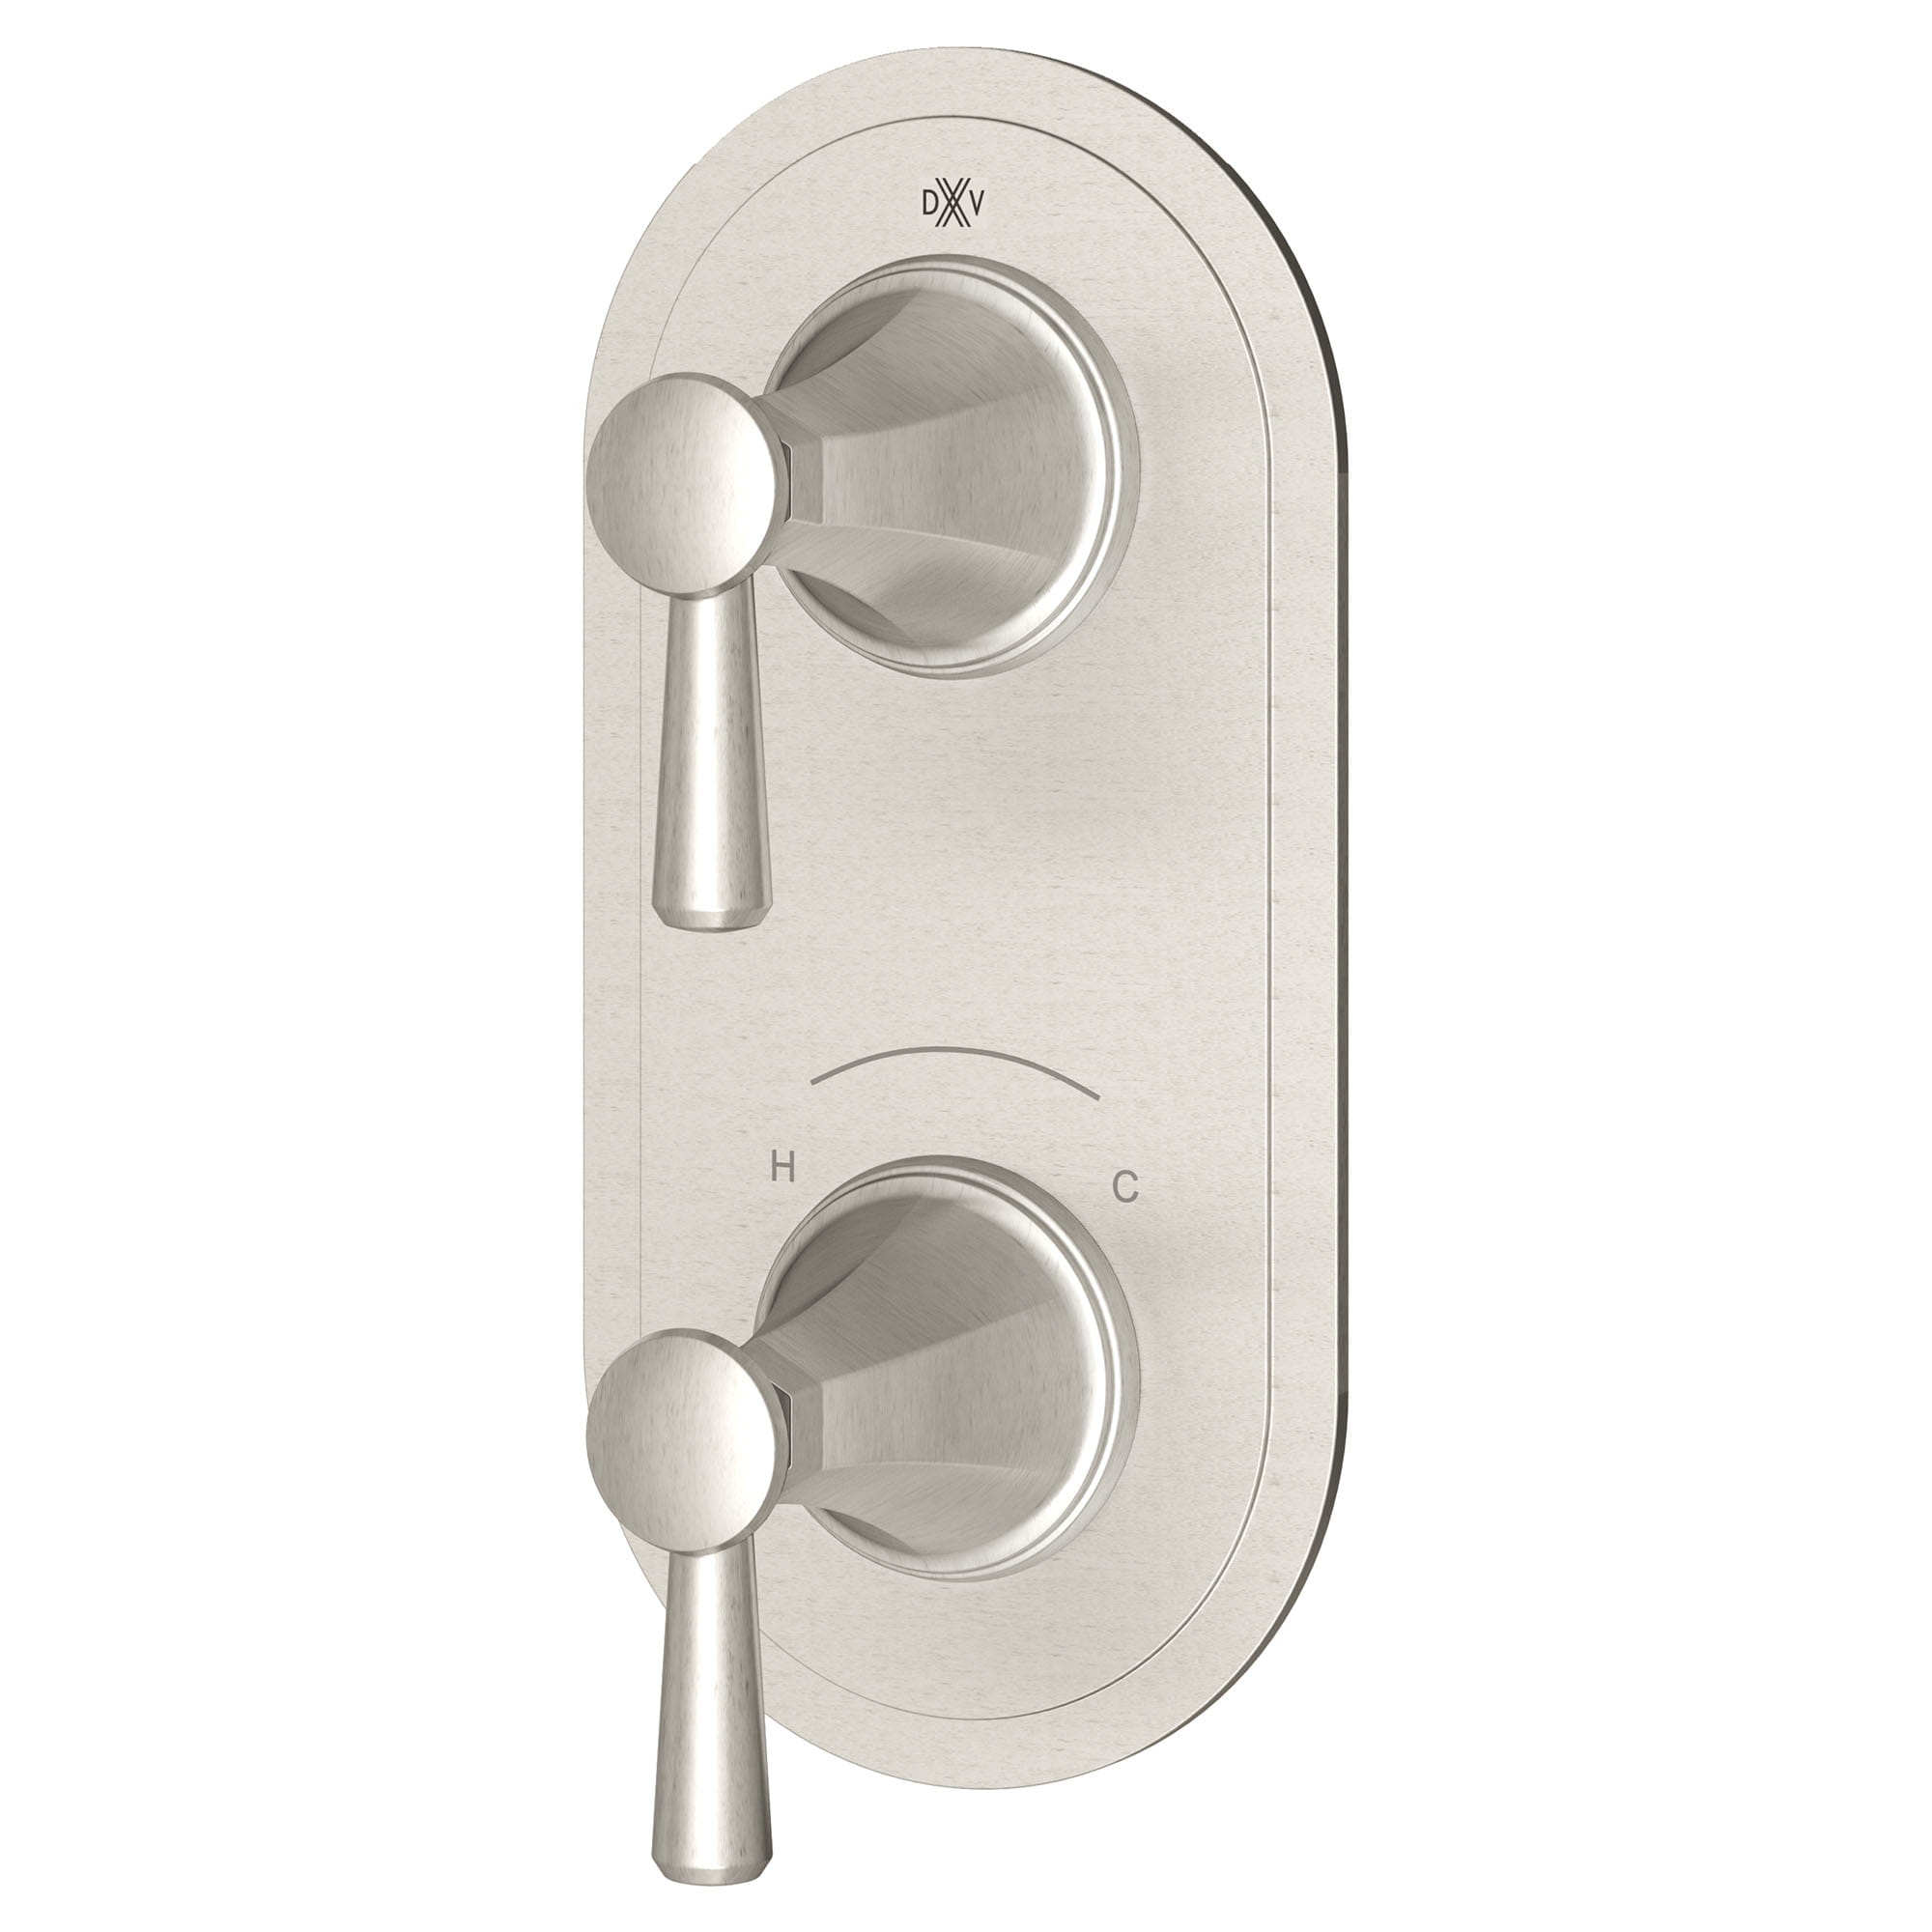 Fitzgerald 2-Handle Thermostatic Valve Trim Only with Lever Handles